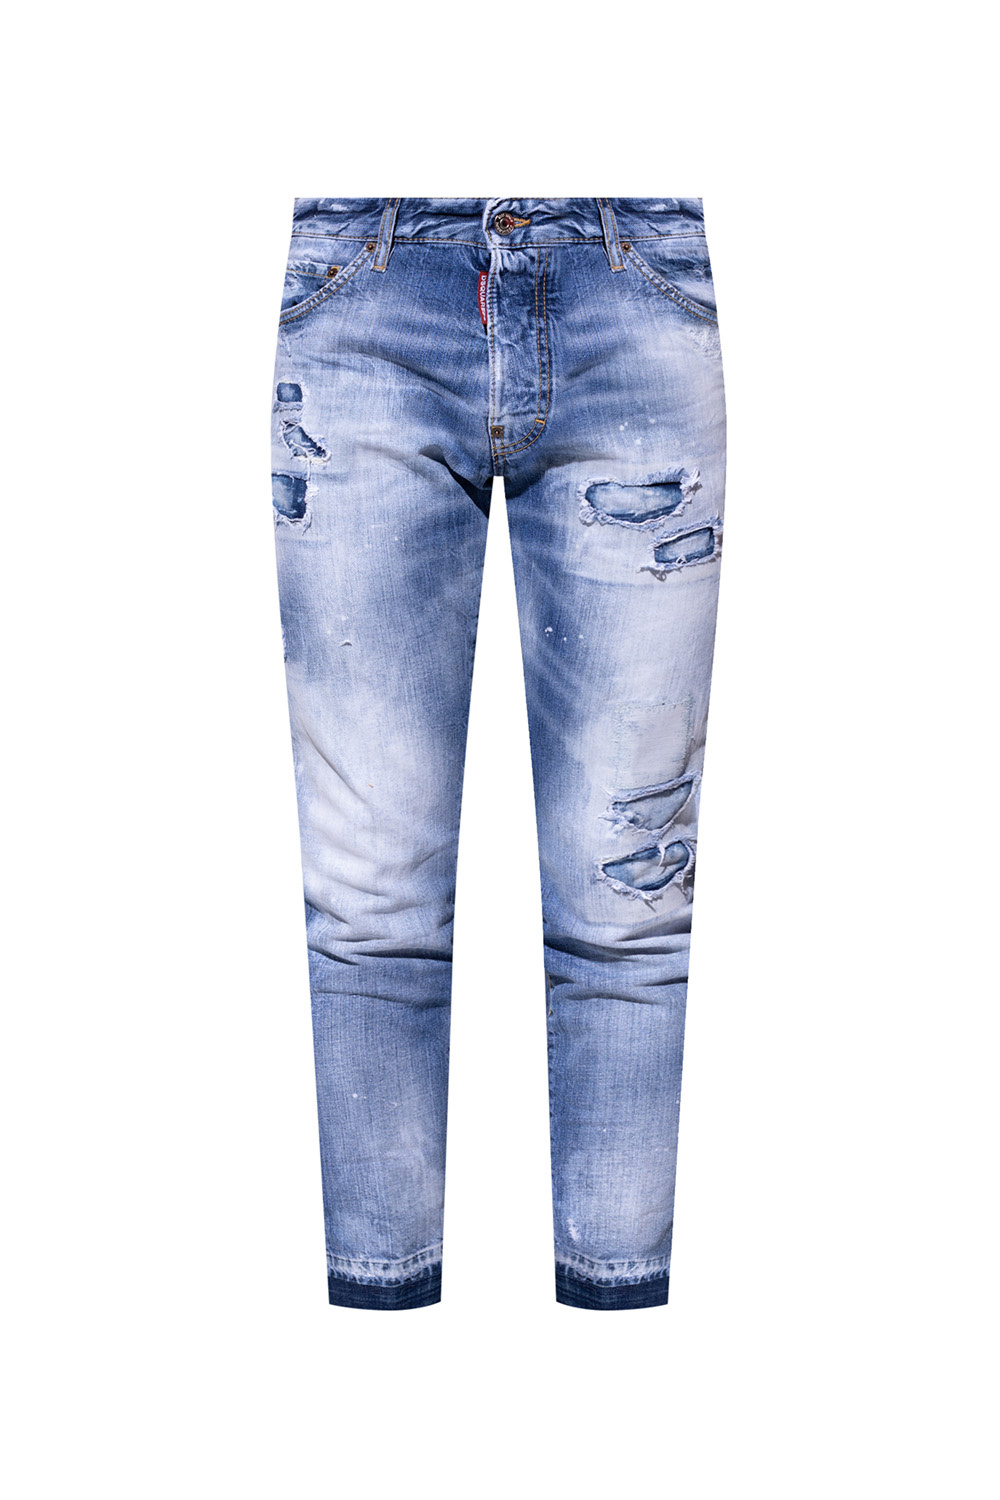 Dsquared2 'Cool Guy Cropped' jeans | Men's Clothing | Vitkac